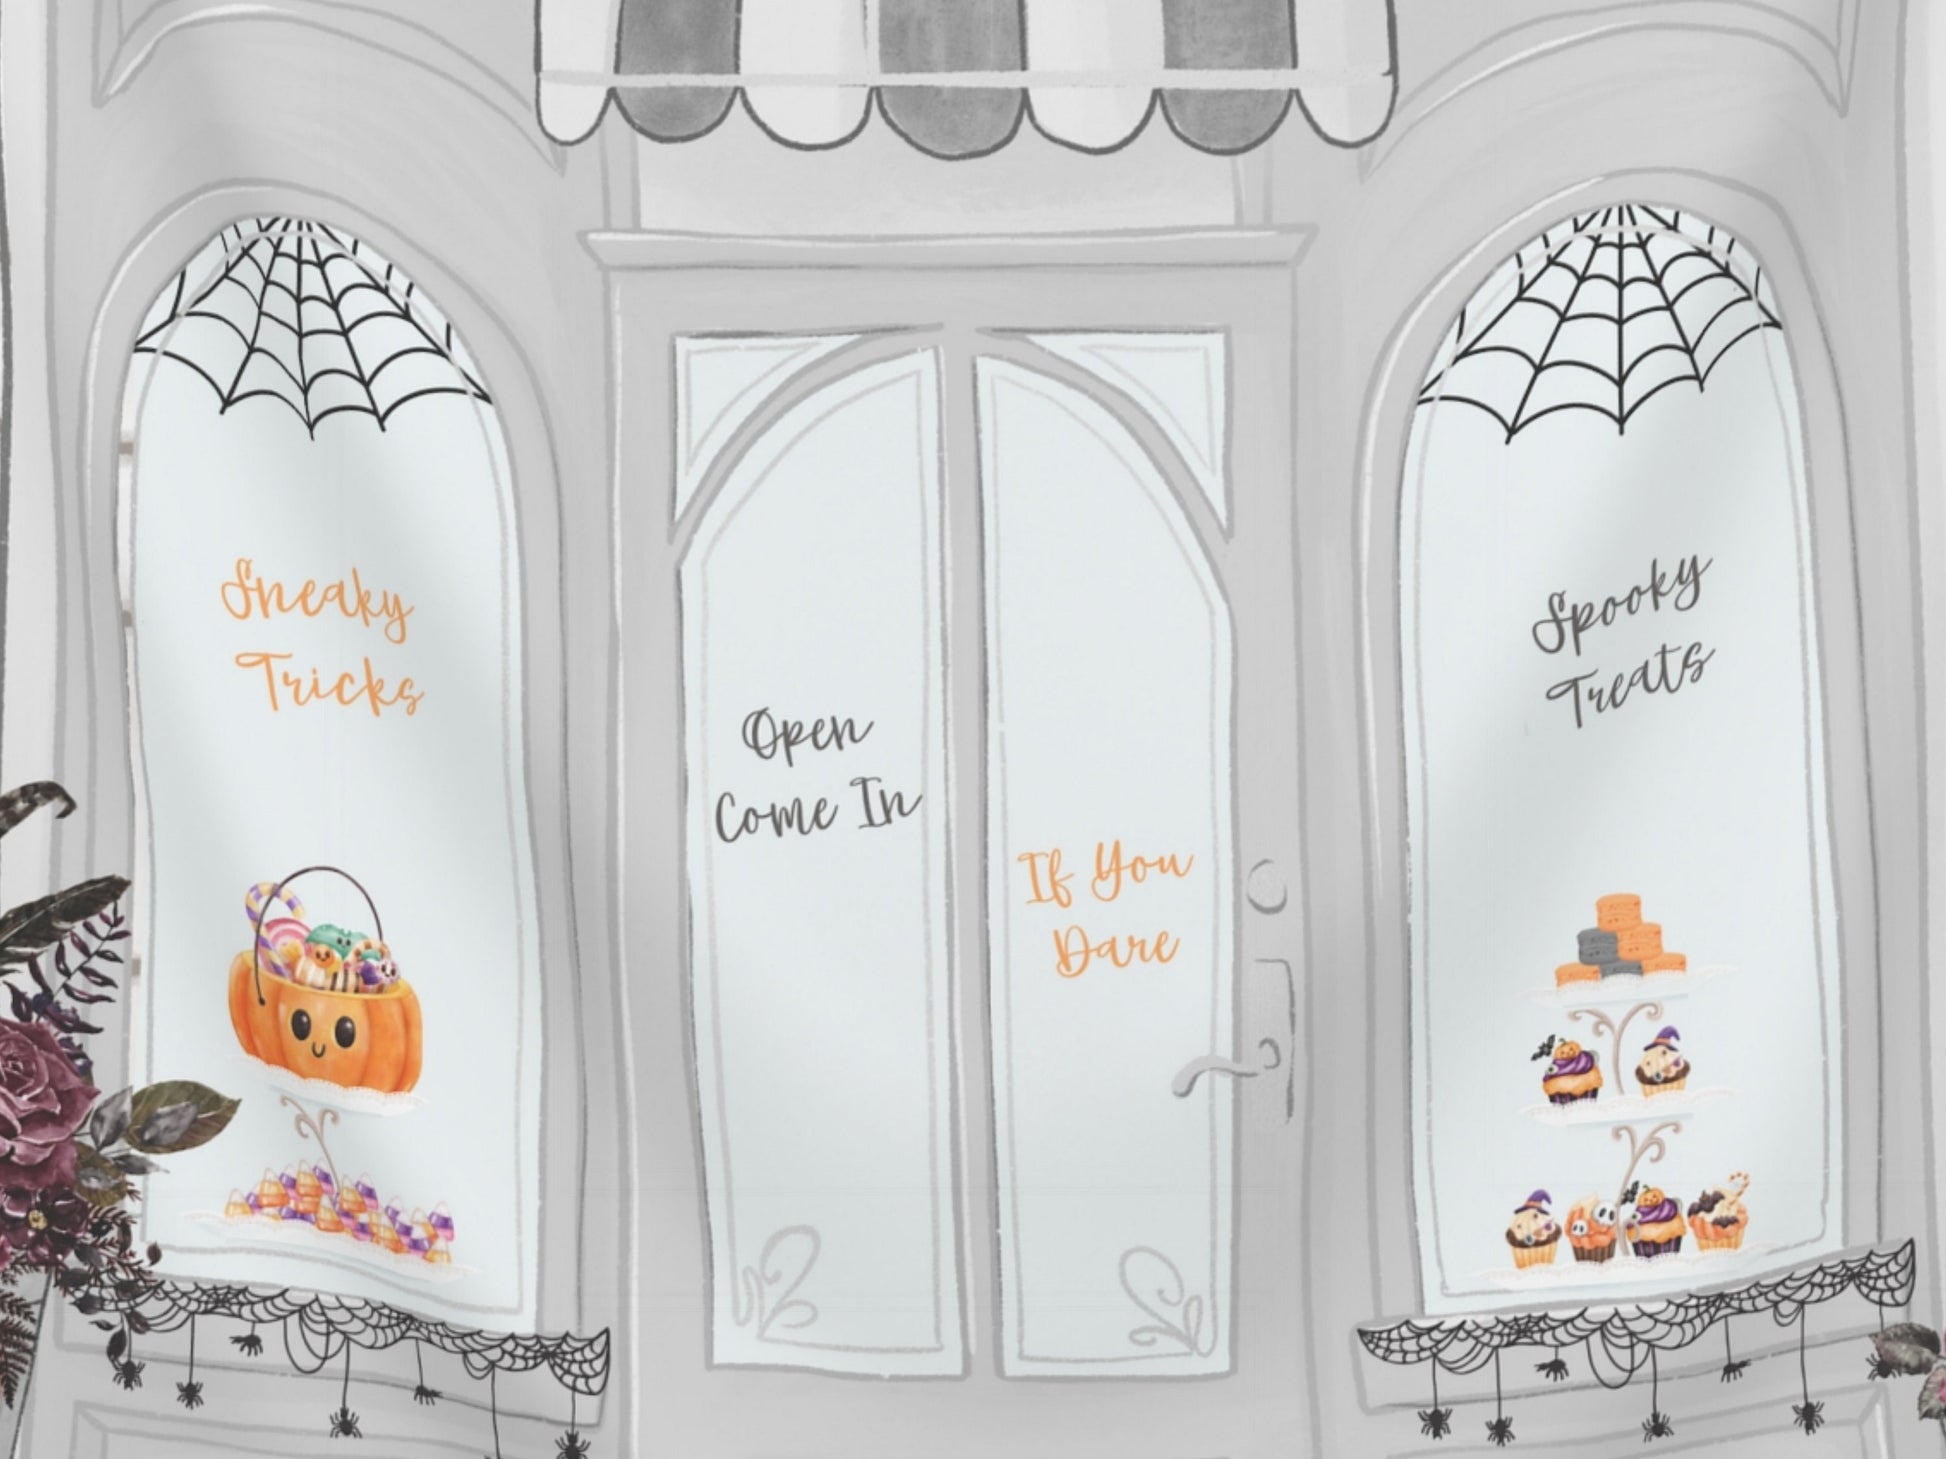 Spooky Vibes Bakery Kids Birthday Party - Trick or Treat - Cupcakes - Boo-kery - October Halloween Baby Shower Décor - Custom Backdrop